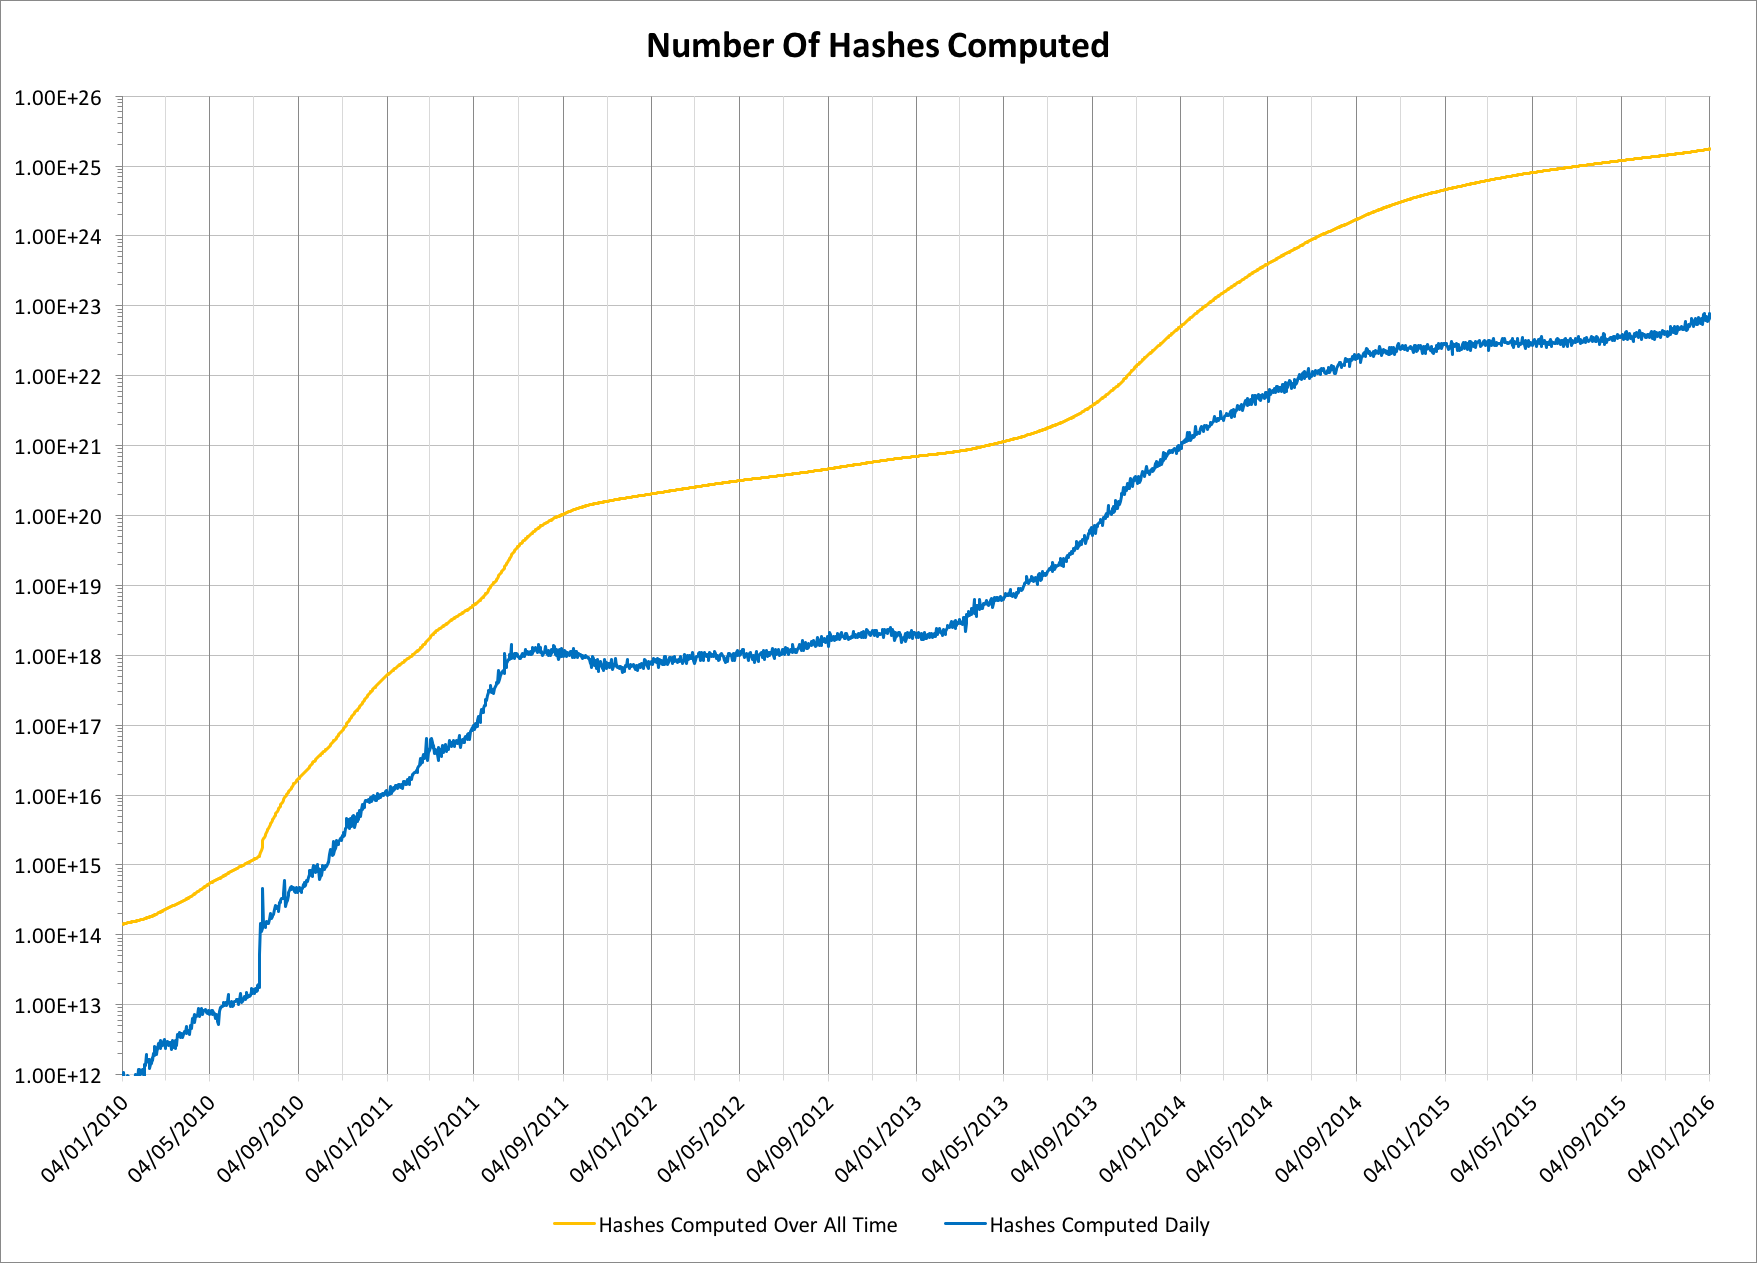 Numbers of Bitcoin hashes over all time and per day